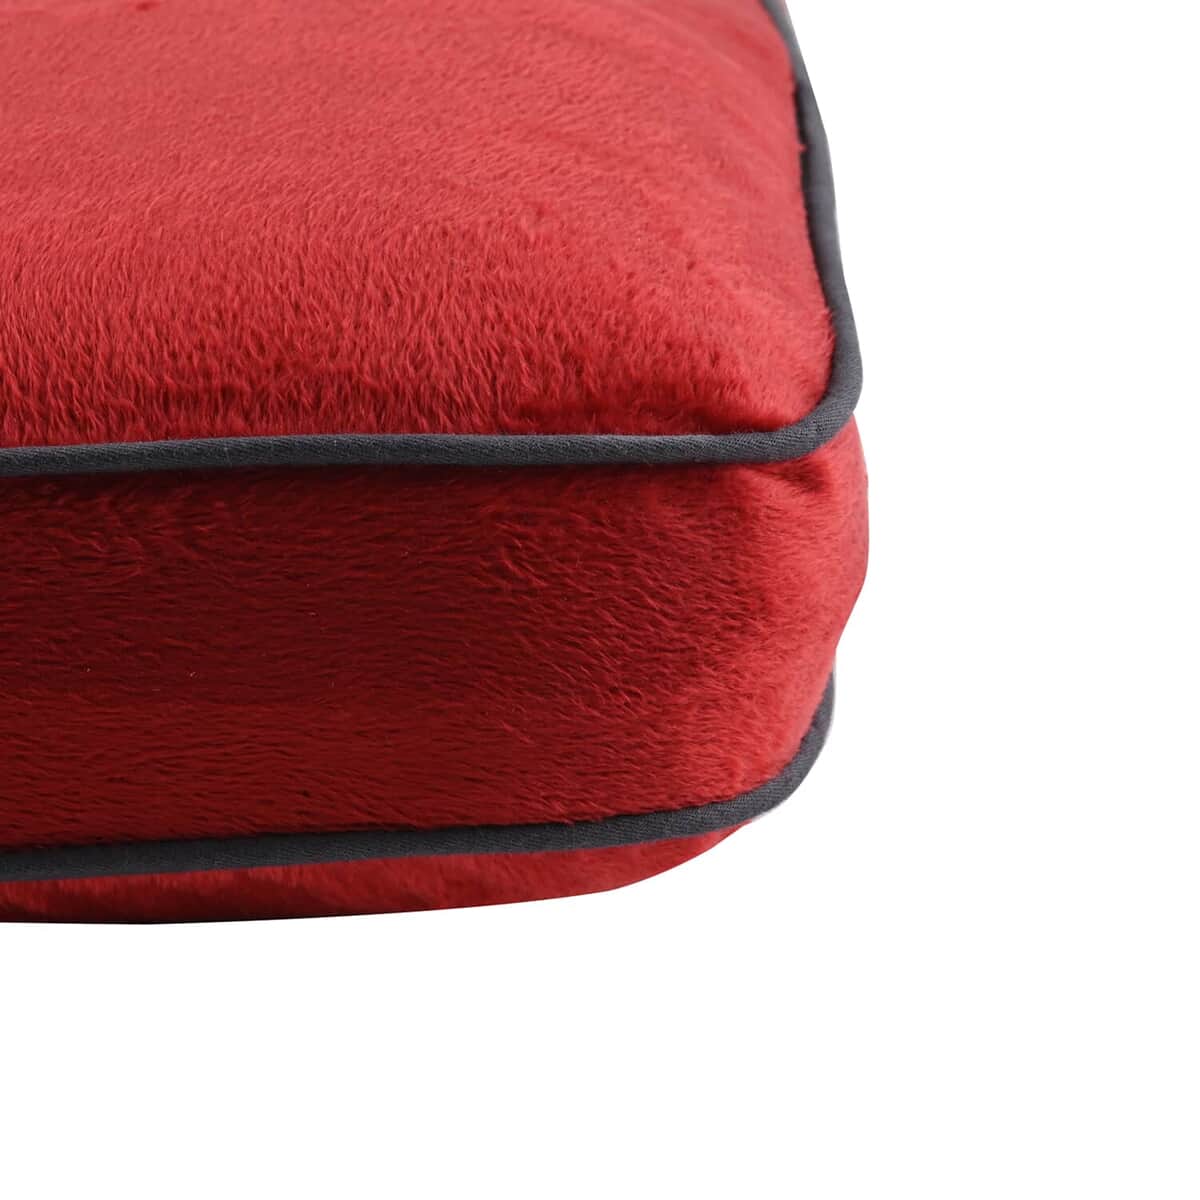 Bon Voyage Memory Foam Square Pillow with Buckle - Red, Square Cushion Insert for Chair Car Sofa Bed, Backrest Cushion, Lower Back Support And Pain Relief Seat Cushion image number 6